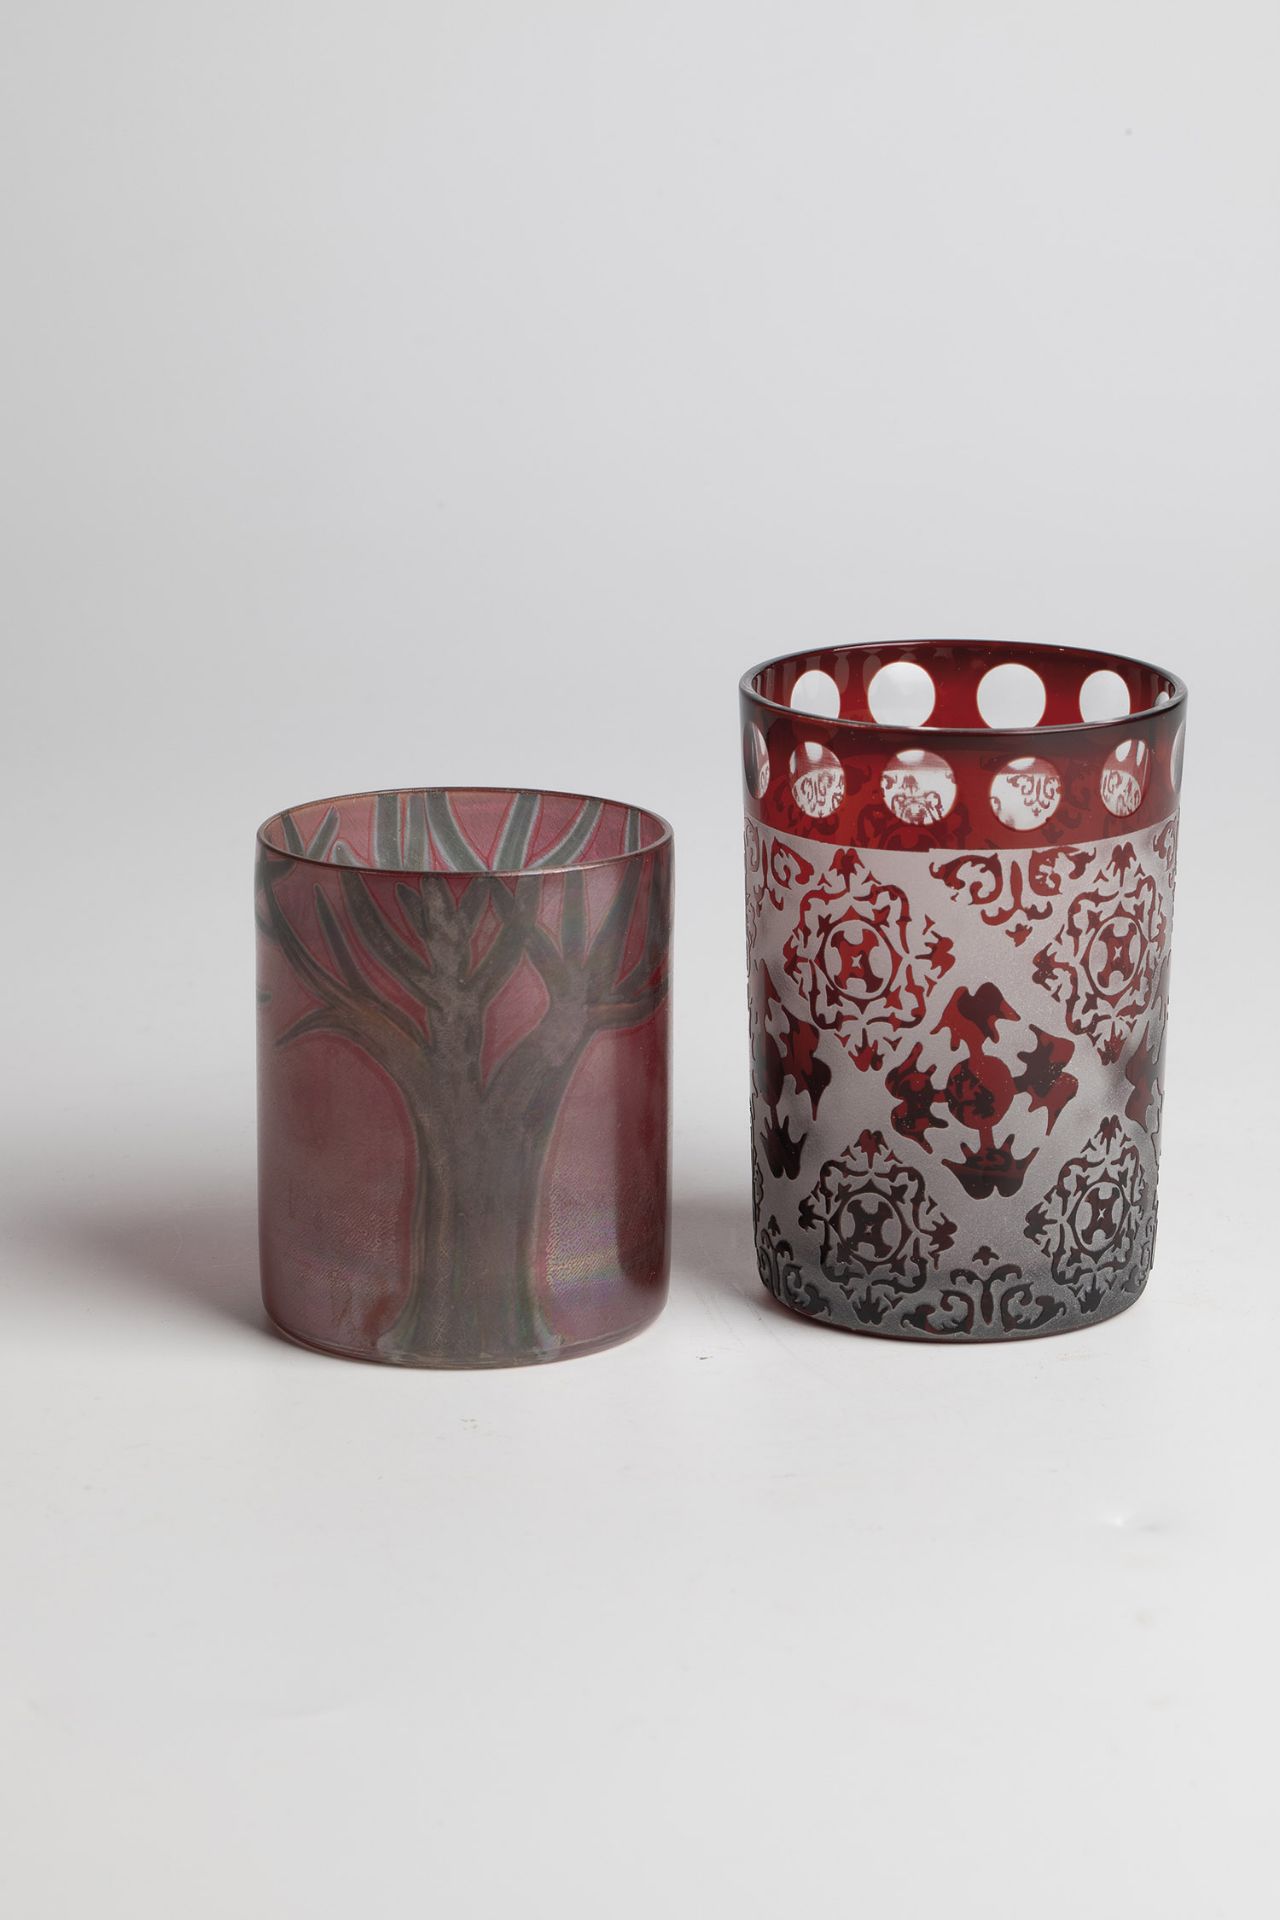 2 cups including Isgard Moje-Wohlgemuth, 1980 Colourless glass, ruby red overlay. Engraved lens